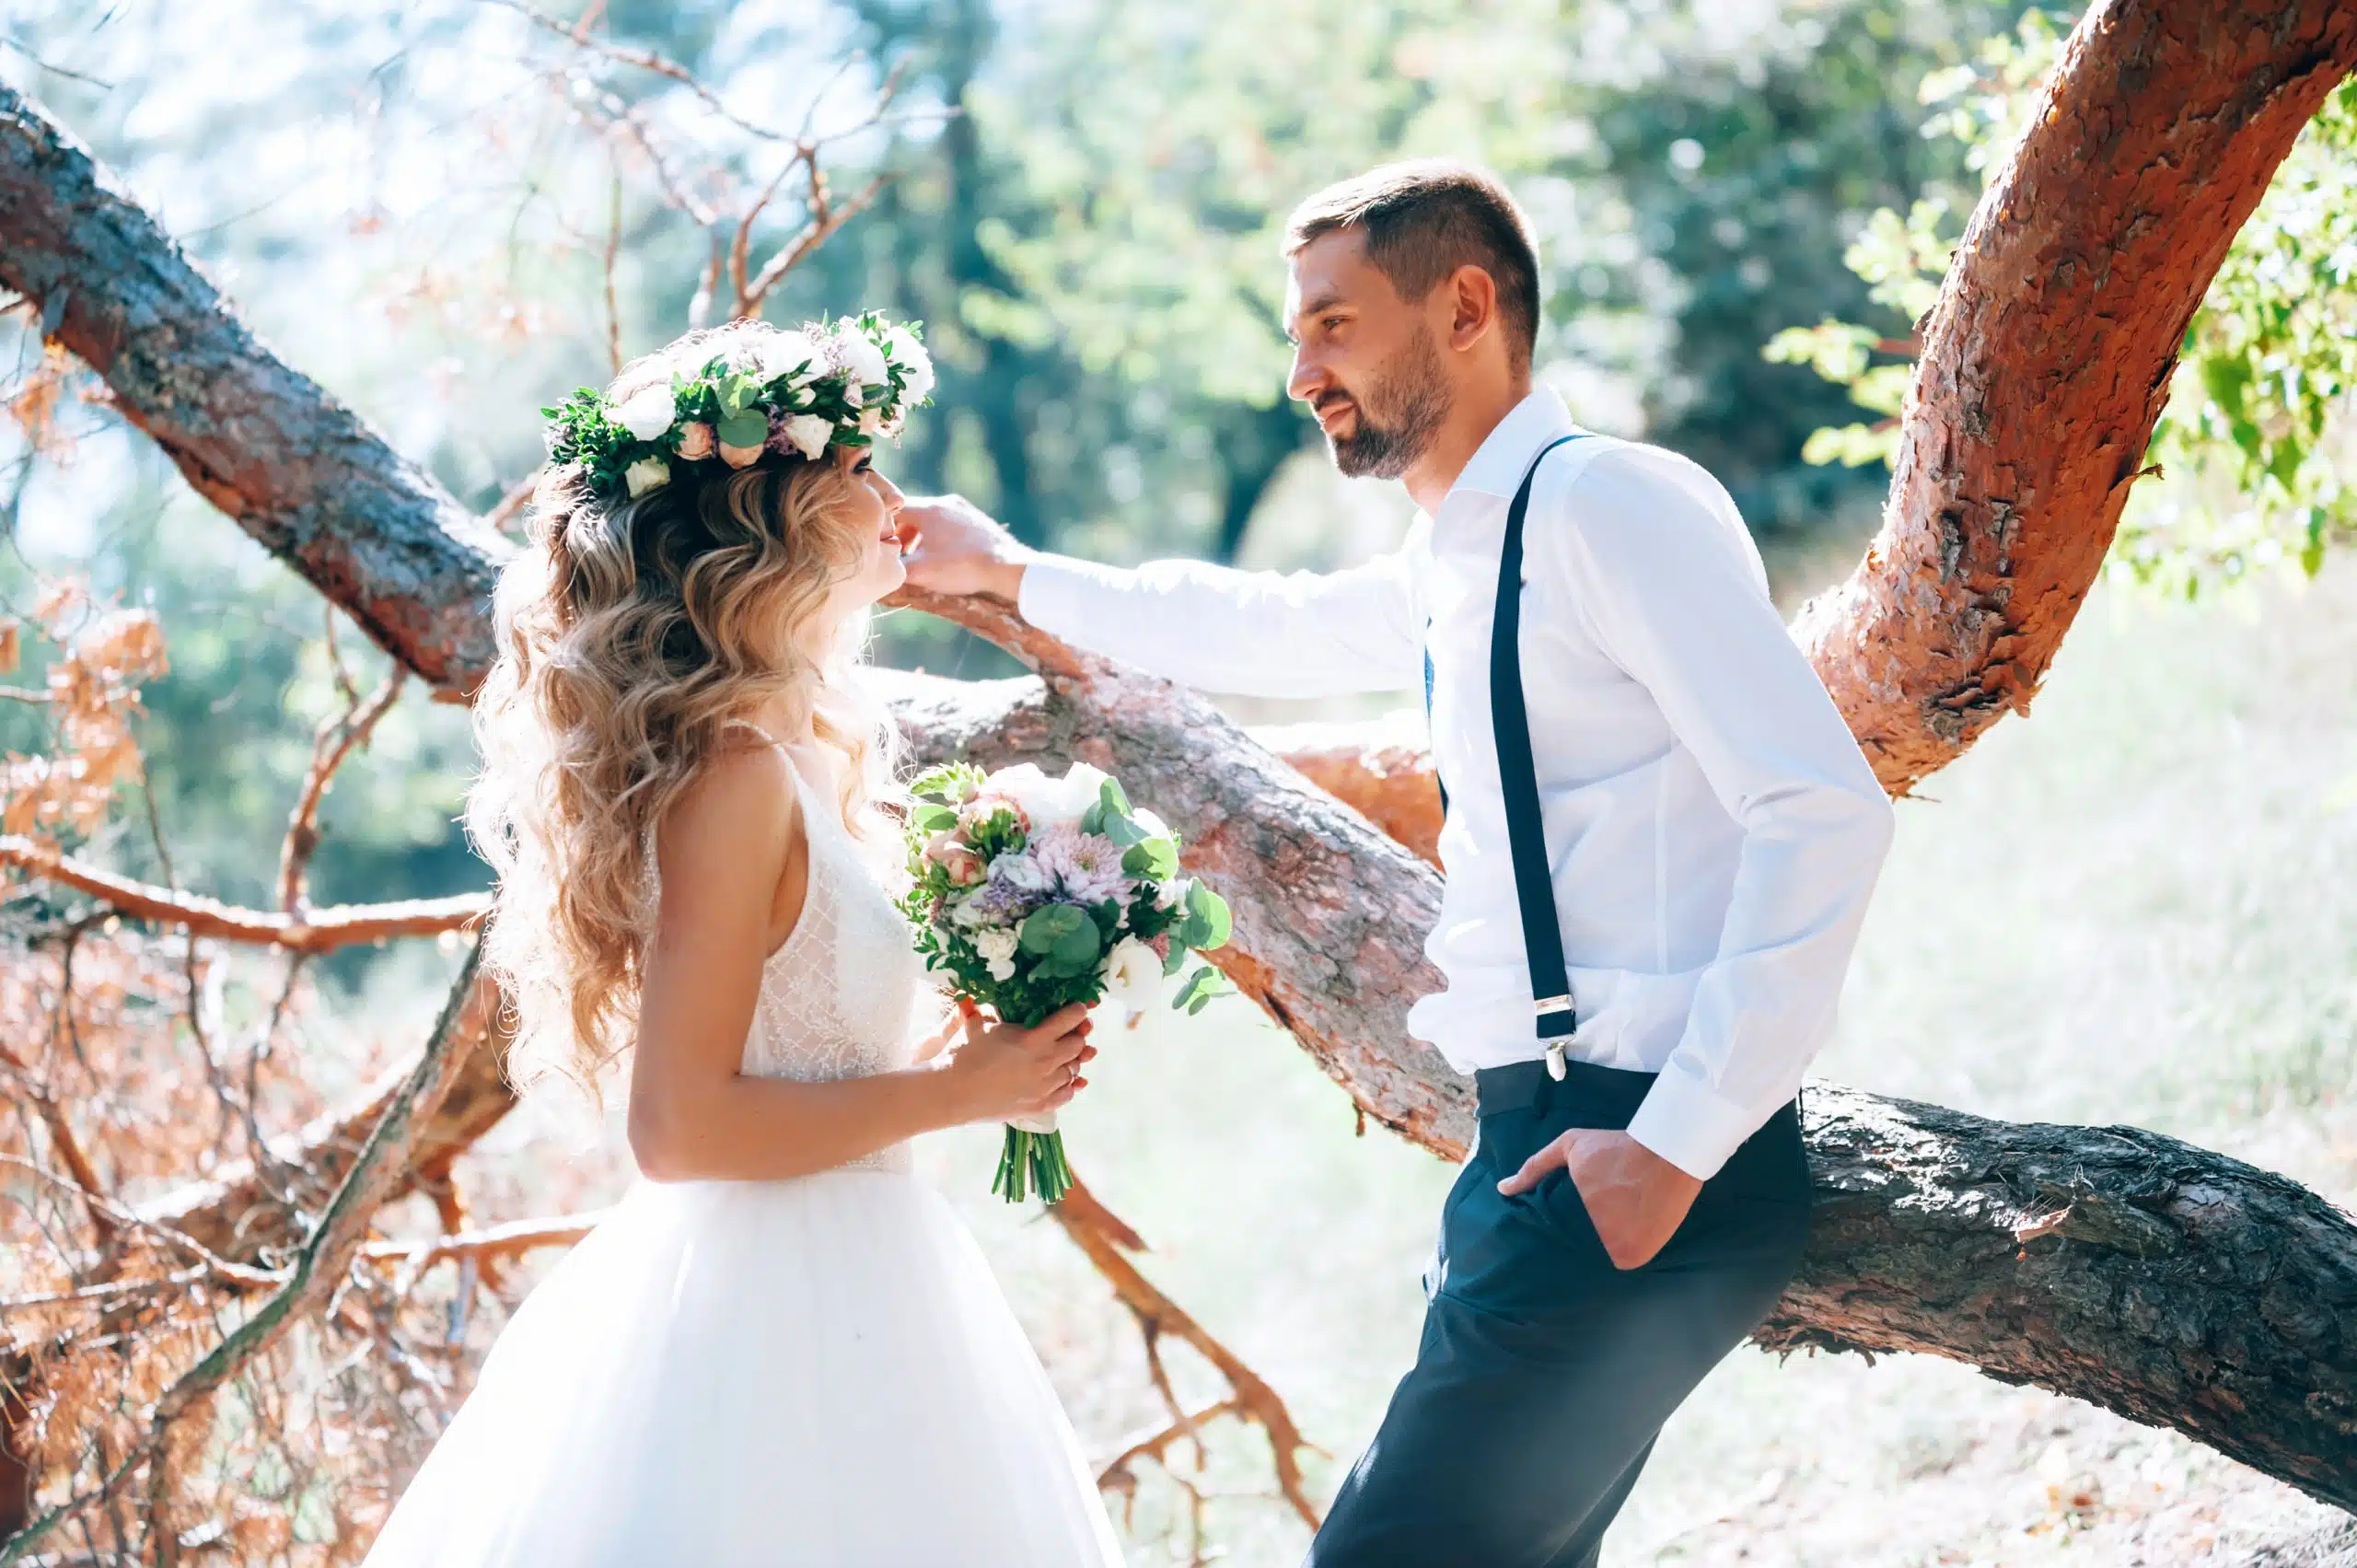 Happy bride and groom on nature, rustic wedding.